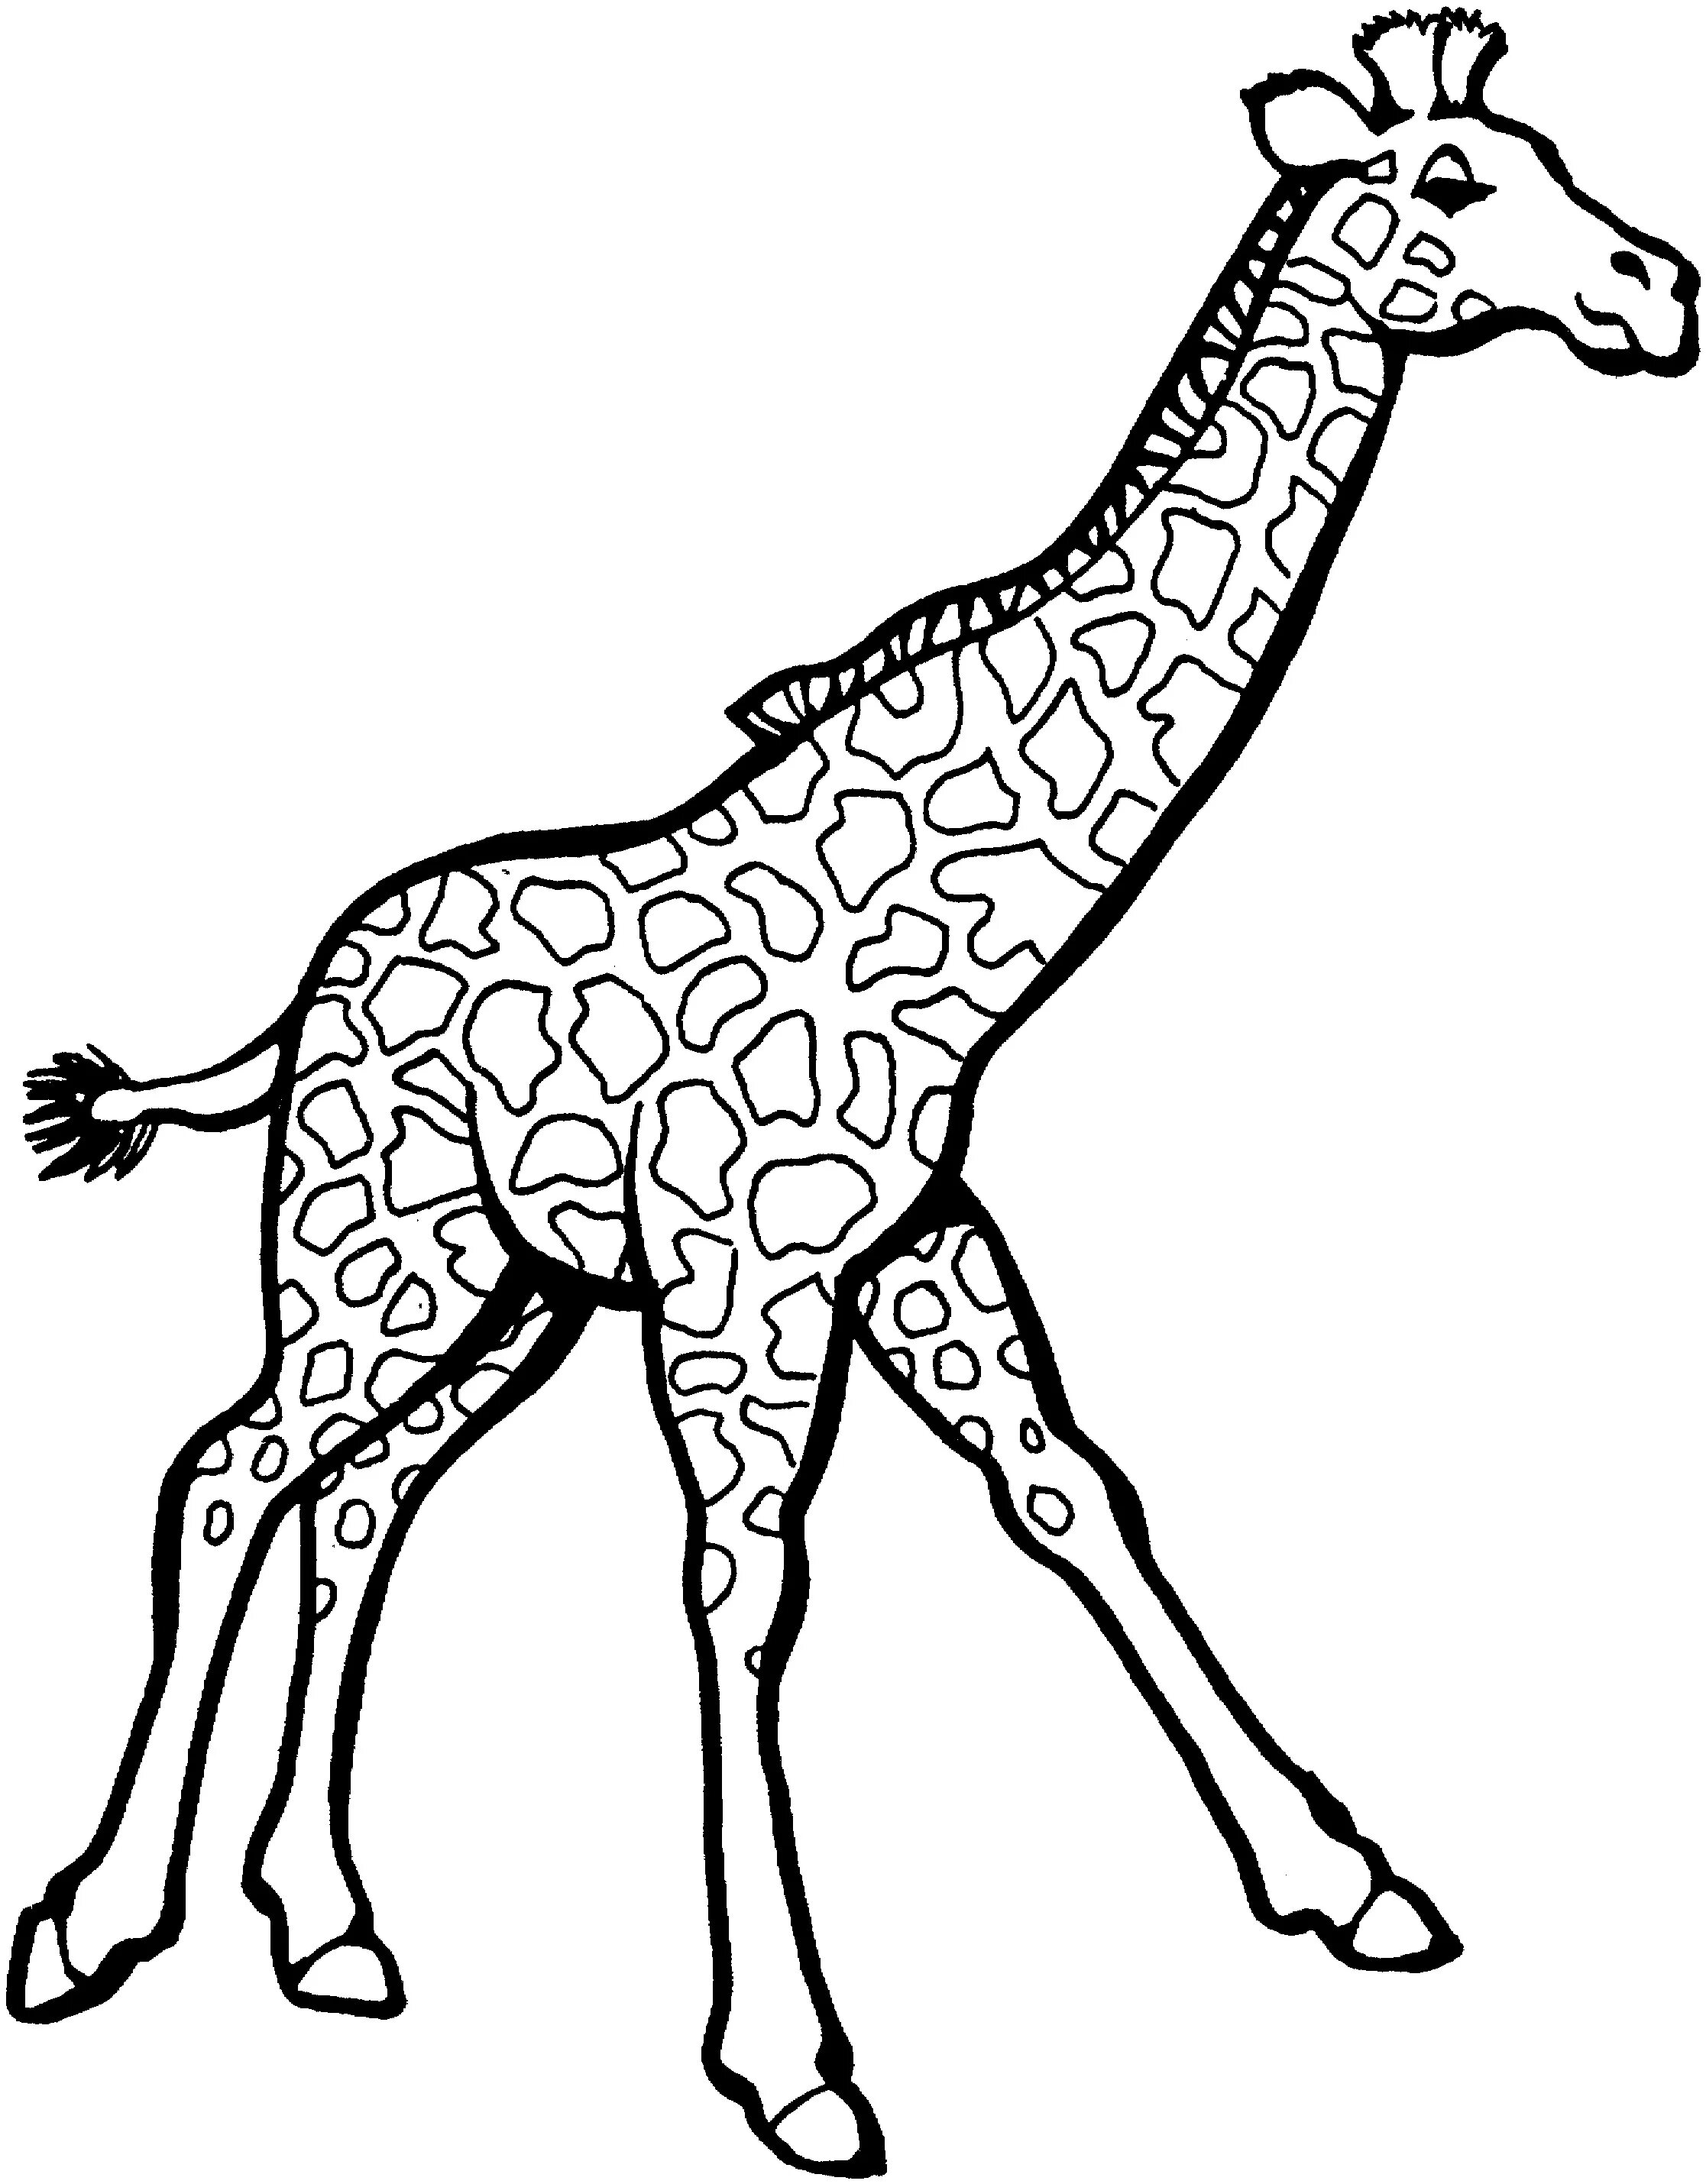 Exciting giraffe coloring book for little students